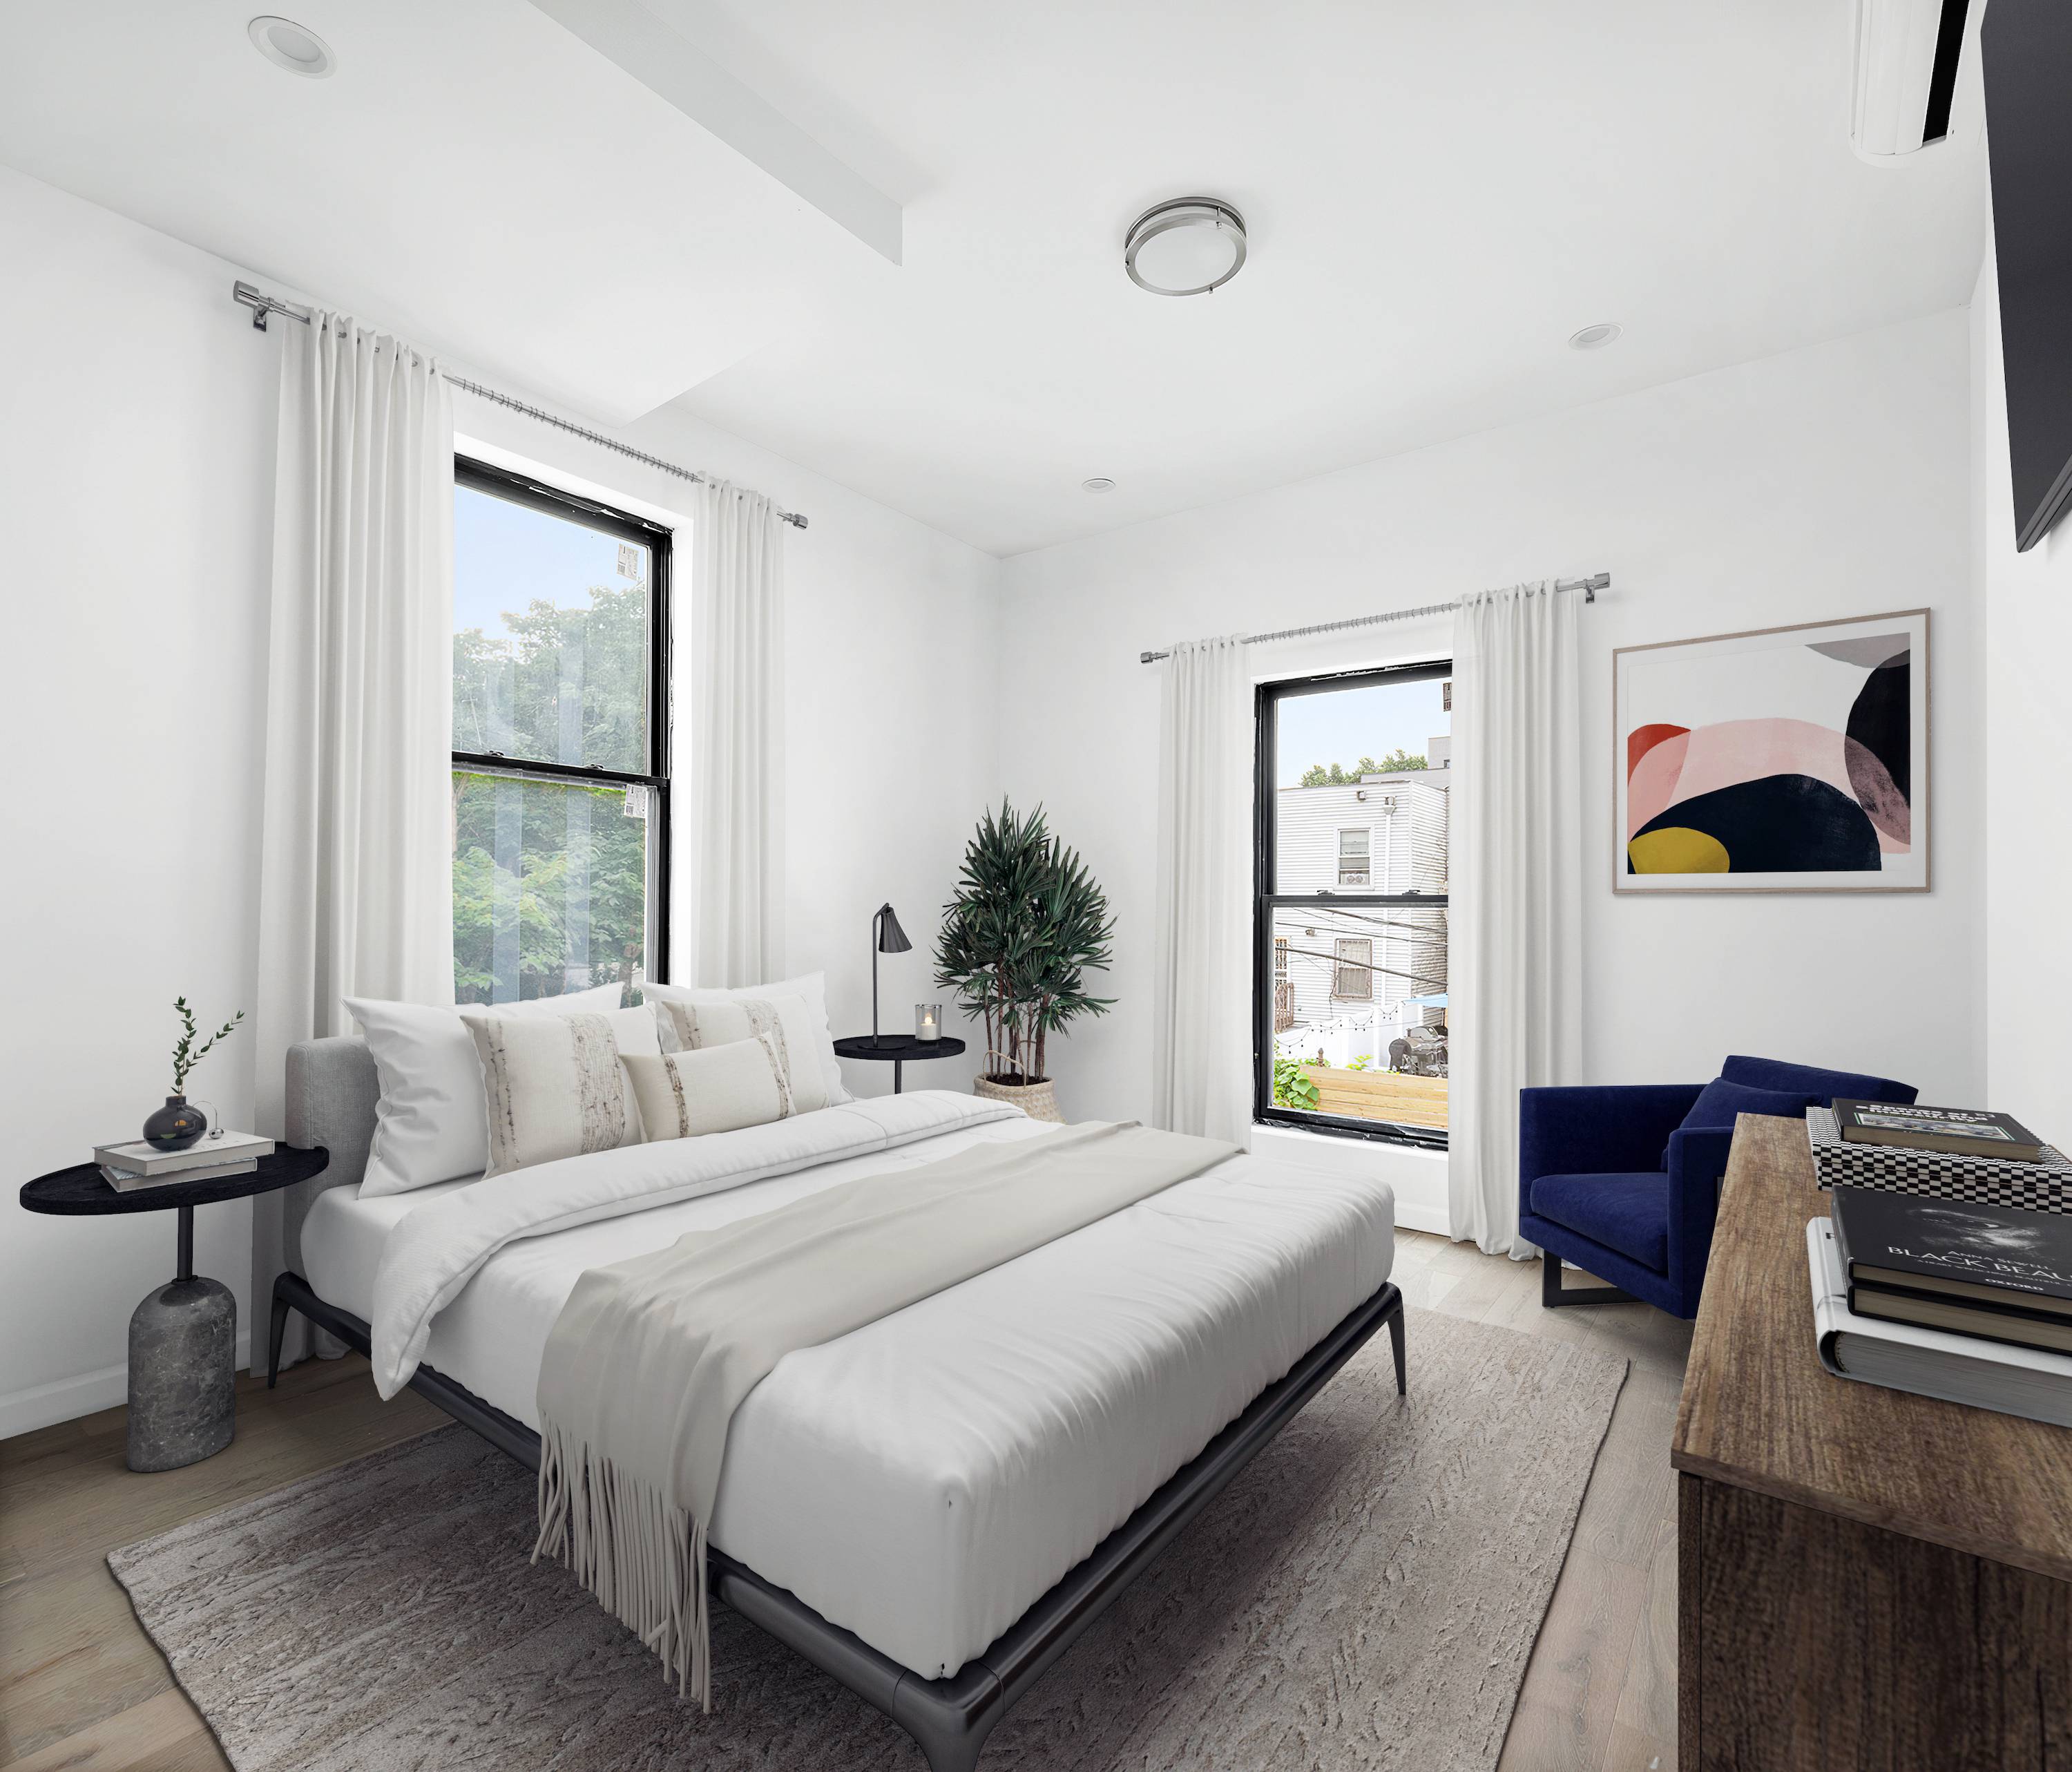 Introducing 702 Greene Avenue, a brand new, alluring boutique condominium boasting a quartet of beautiful 2 bedroom homes and a prime Bedford Stuyvesant address.